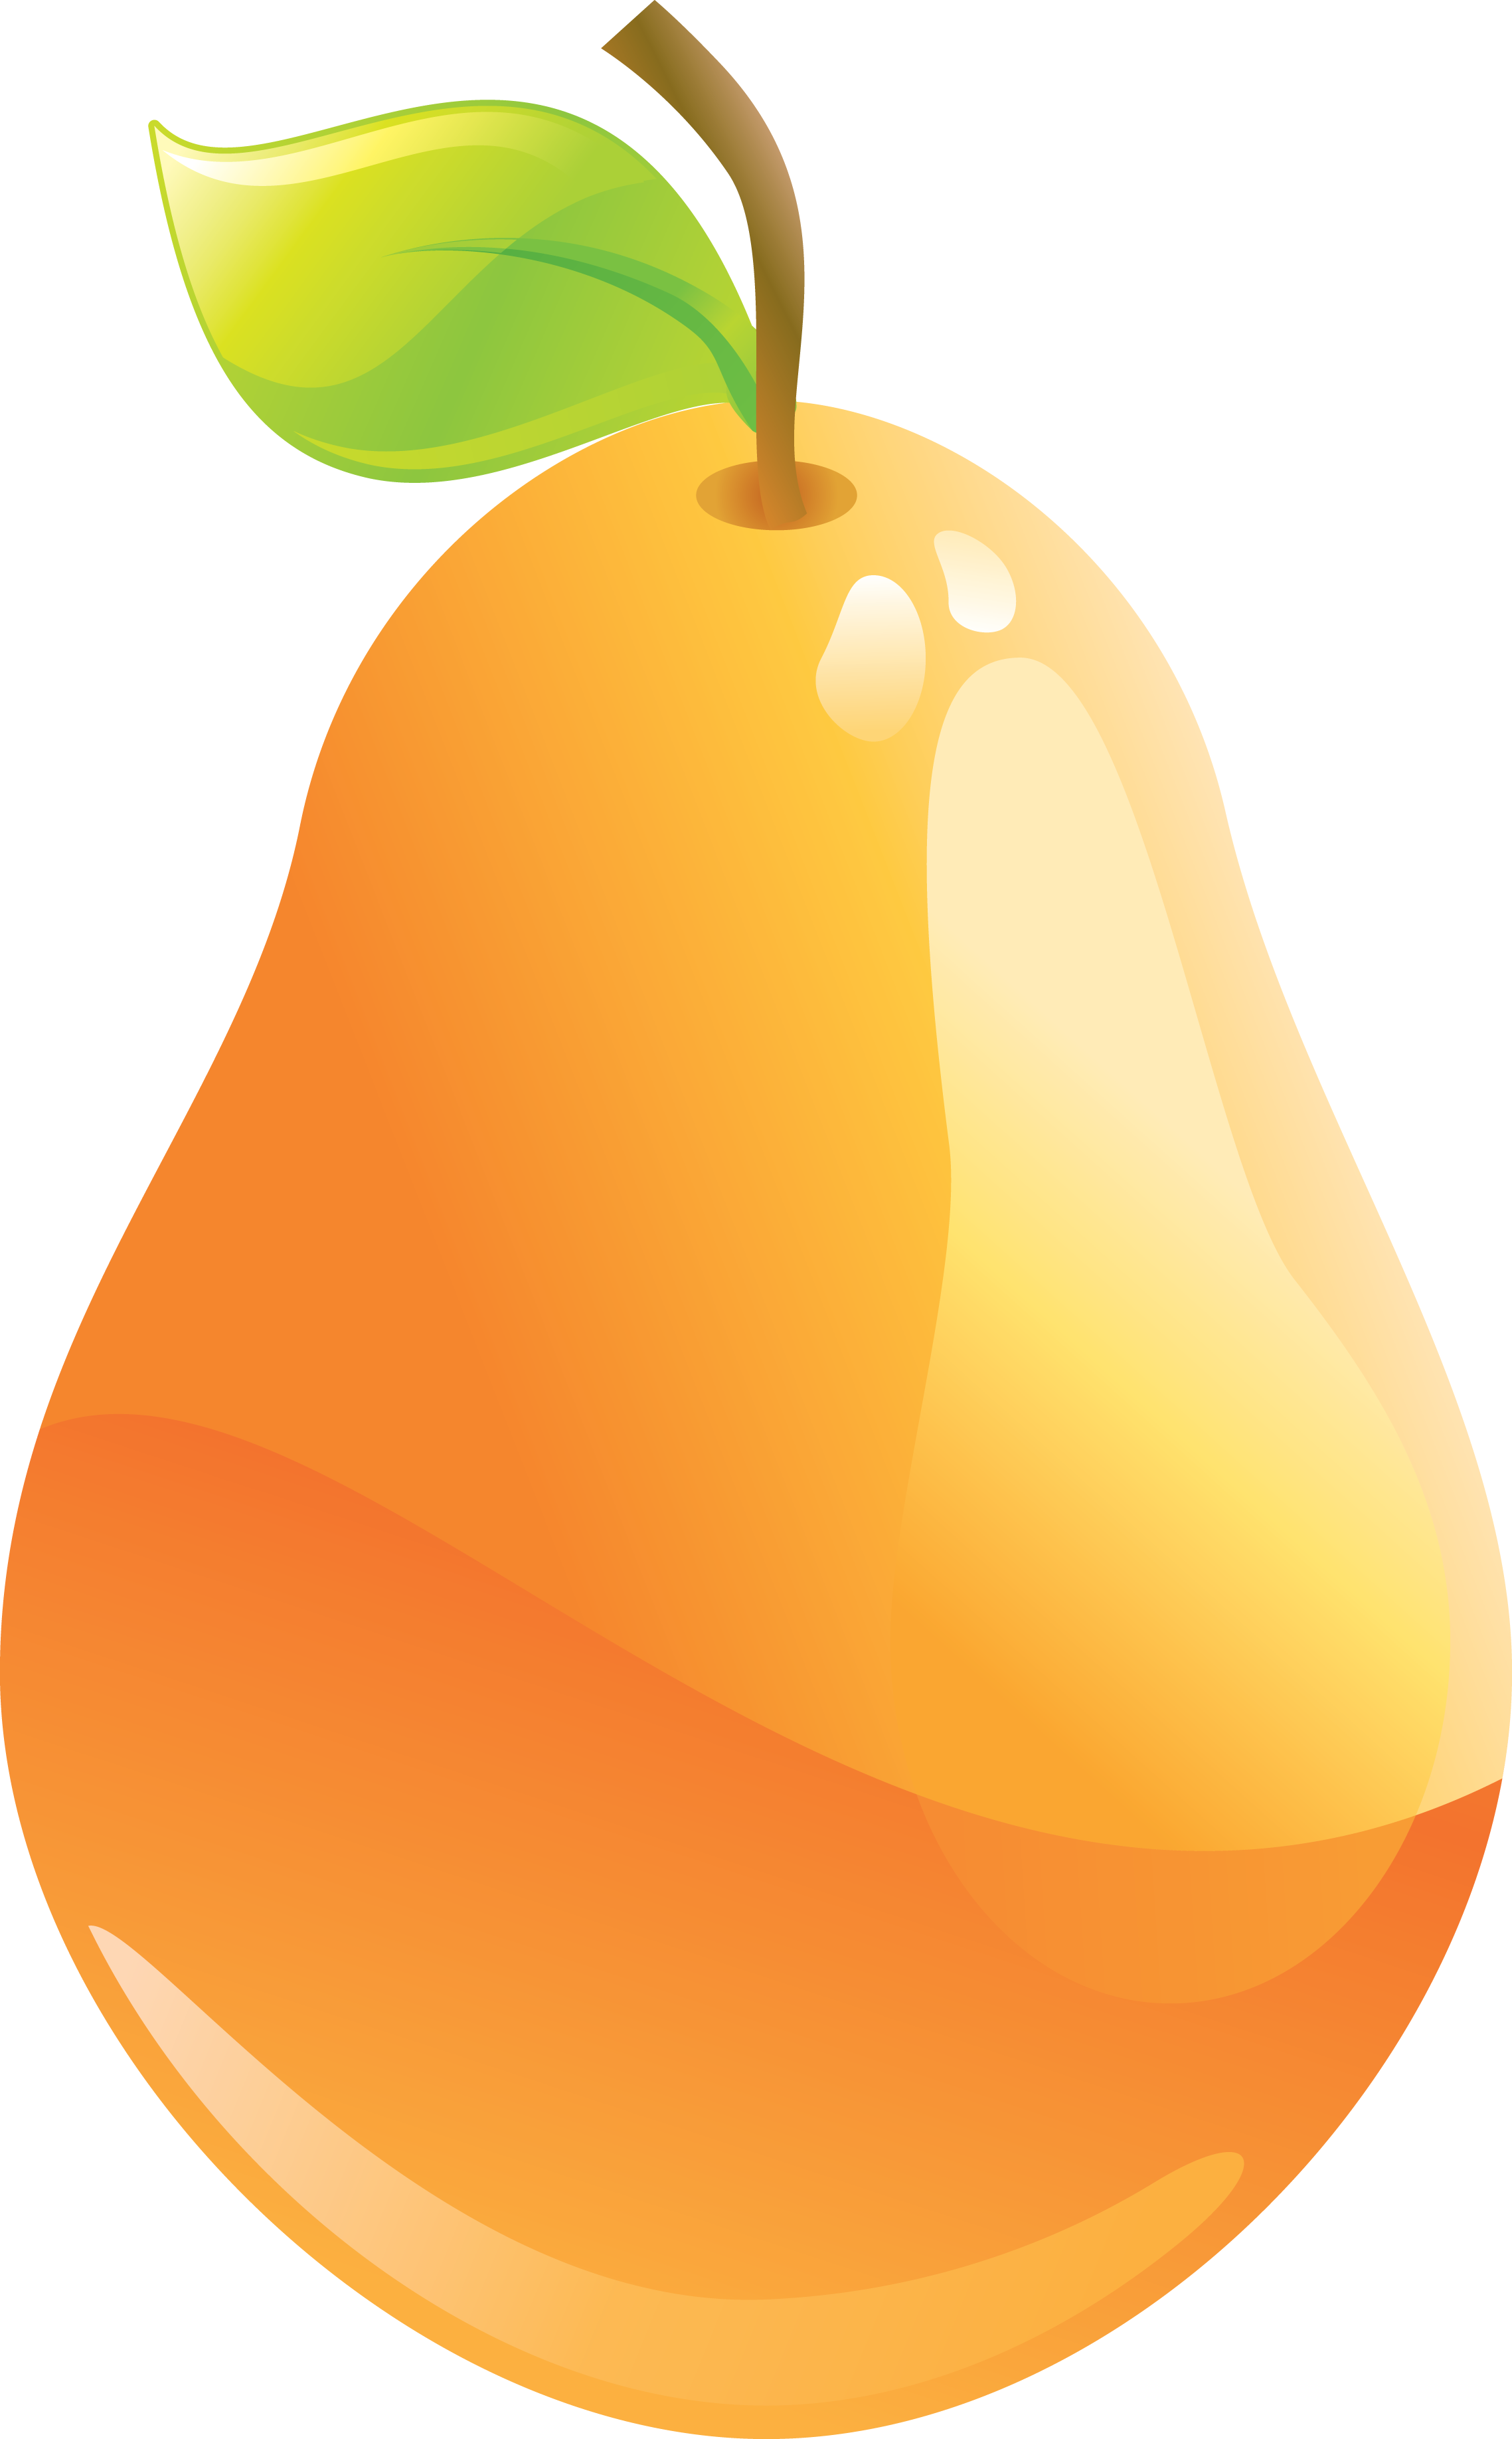 Pear PNG Clipart Image